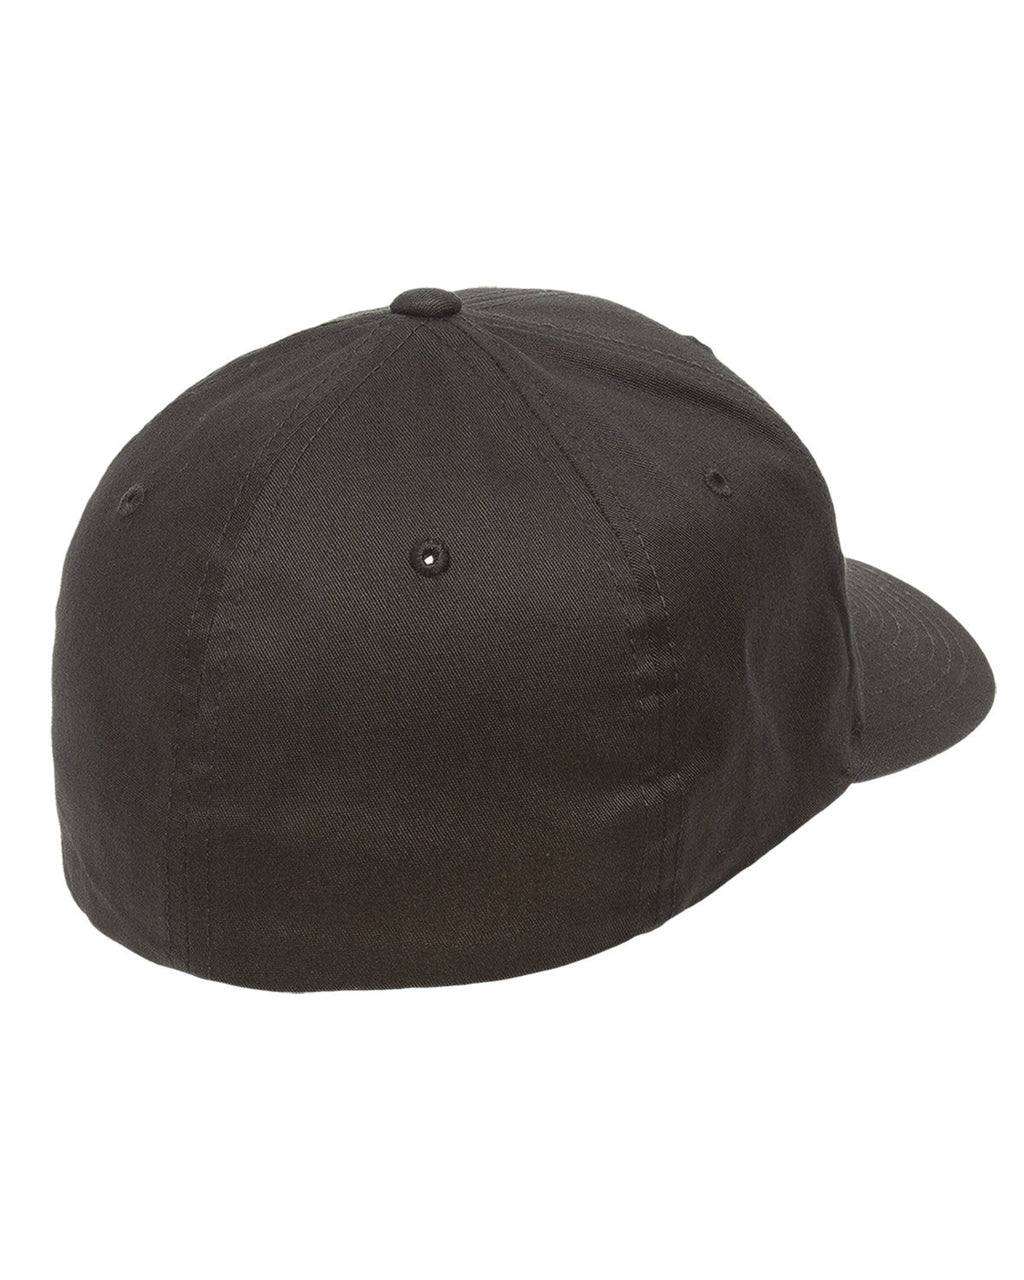 Hats Cap Yupoong and Corporate V-Flexfit Accessories Cotton Twill